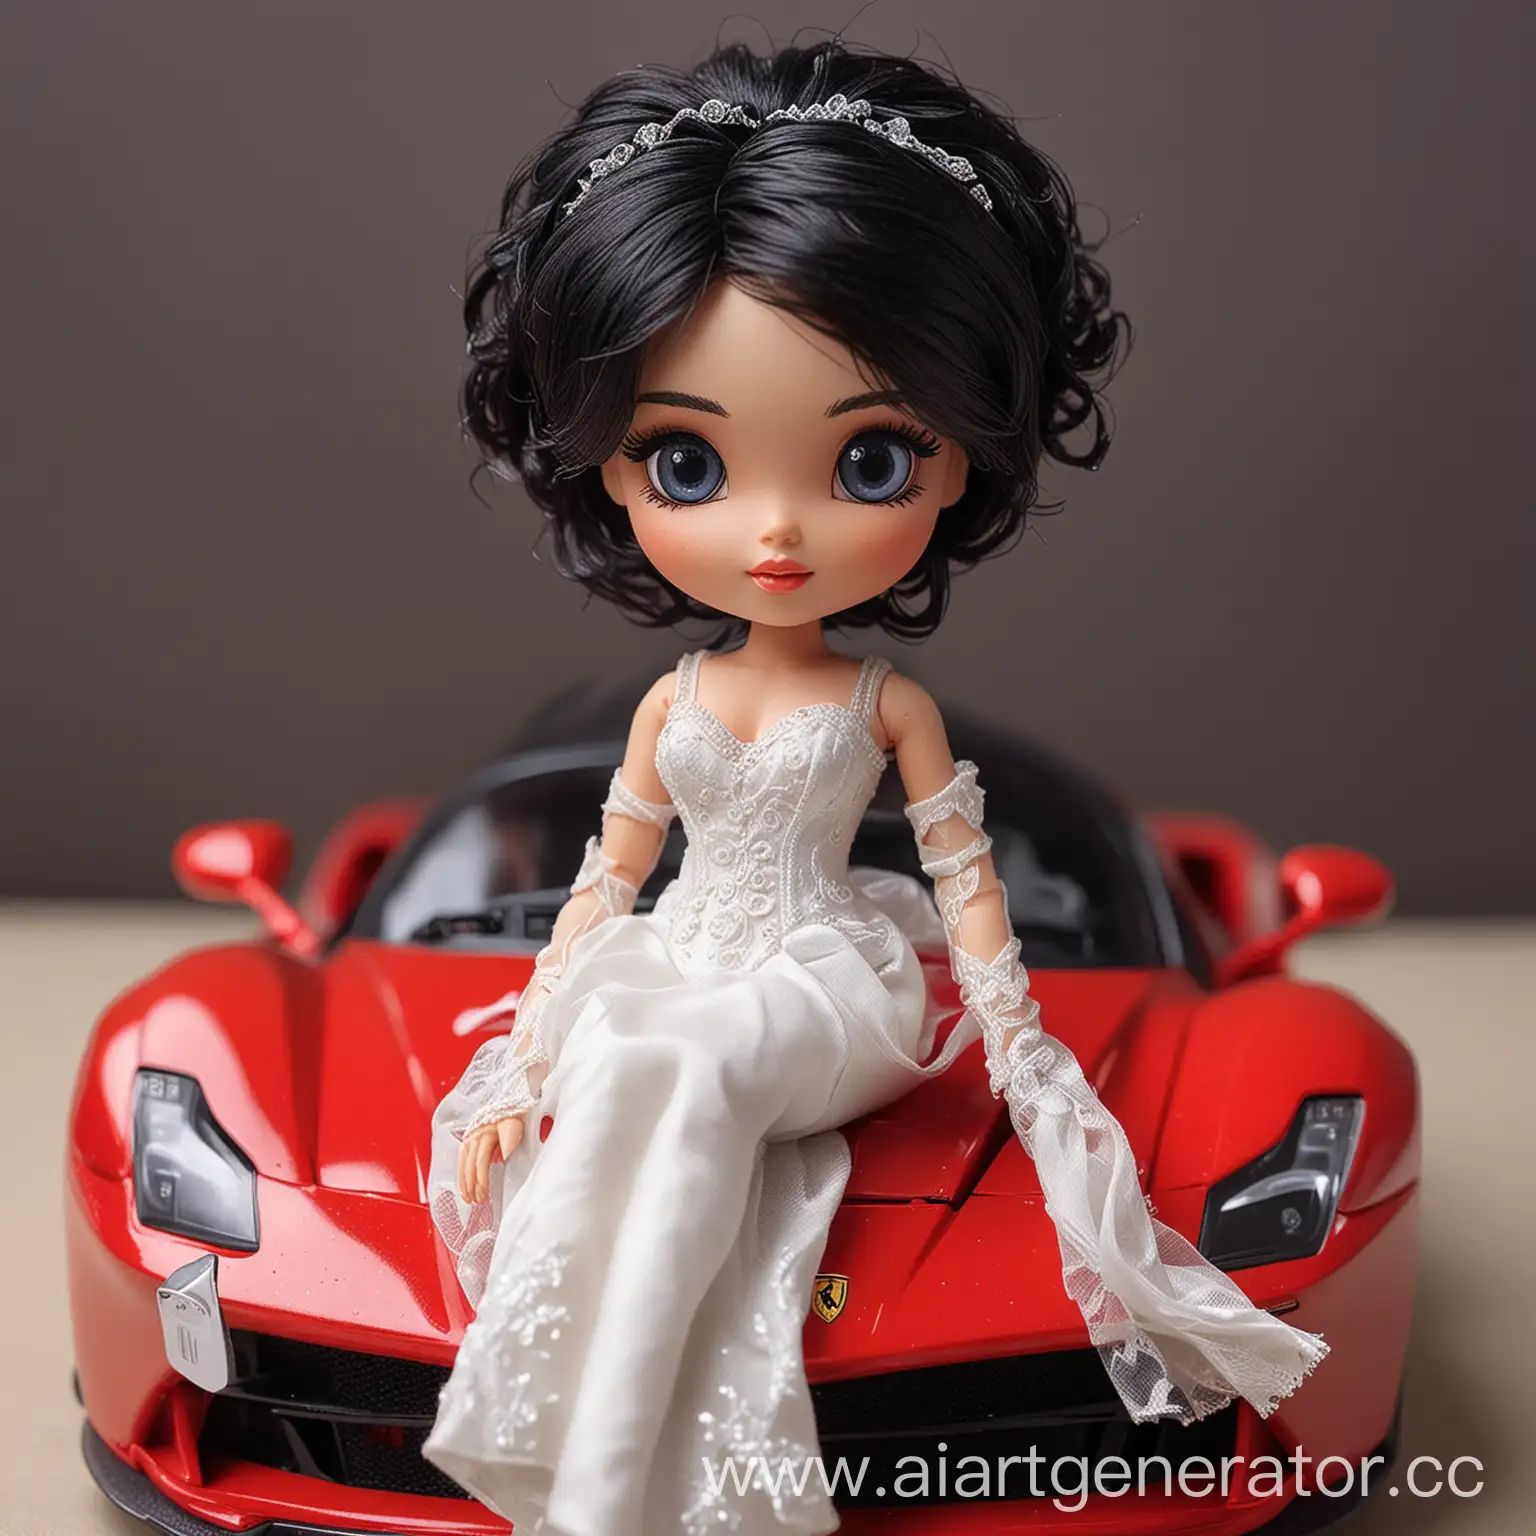 a doll with black short hair in the bride's dress on a hood of a ferrari laferrari